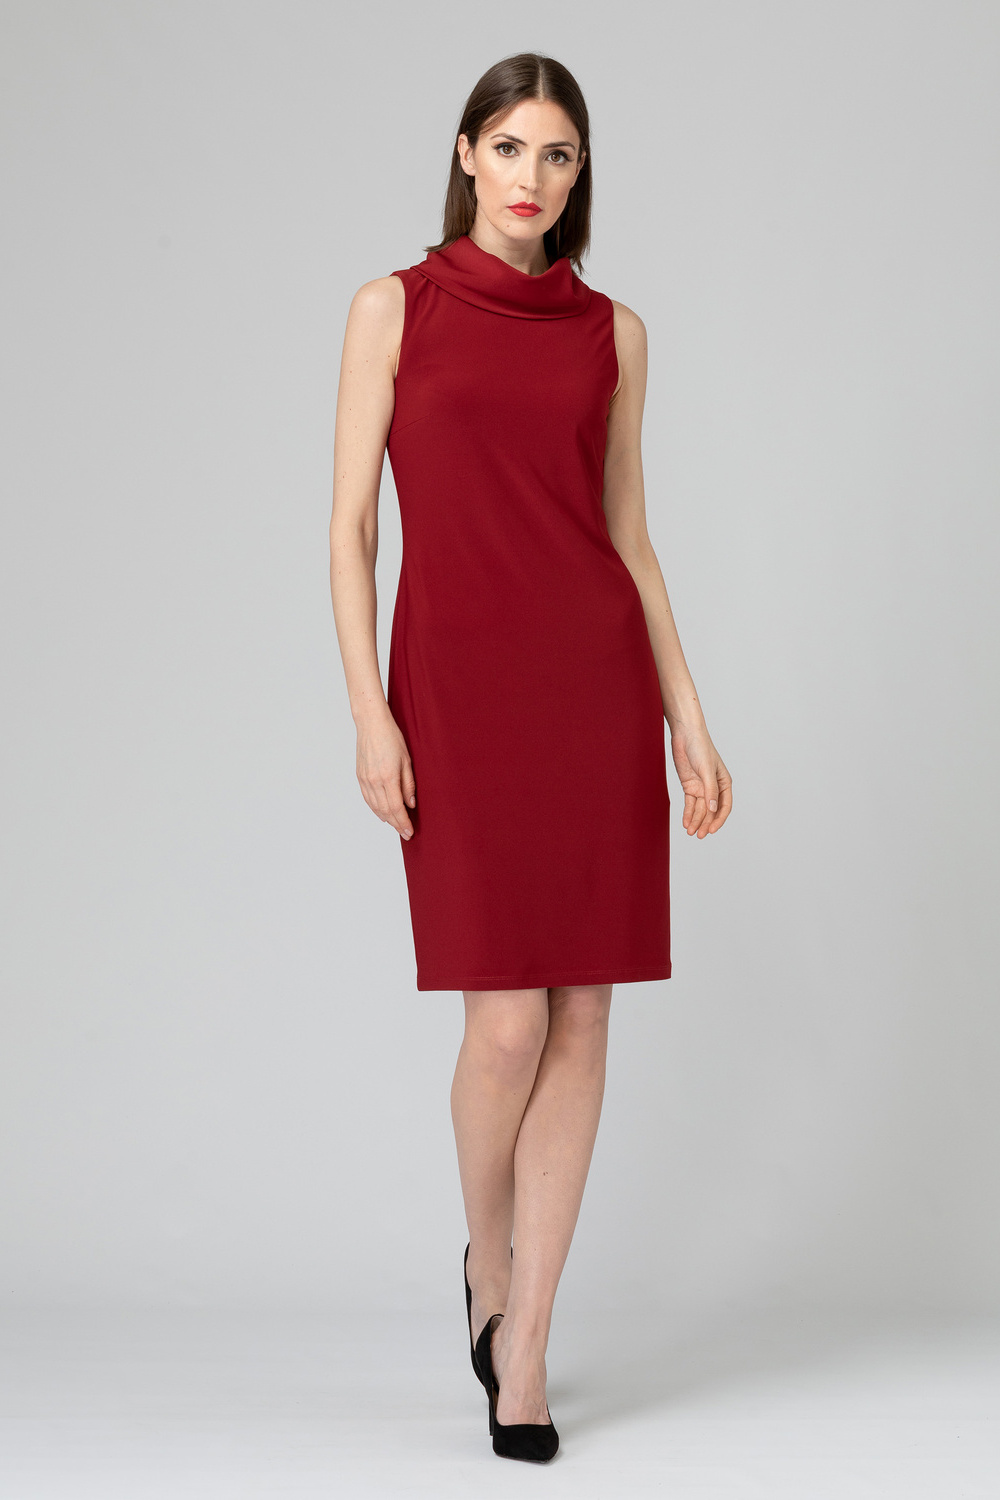 Joseph Ribkoff dress style 193012. Imperial Red 193